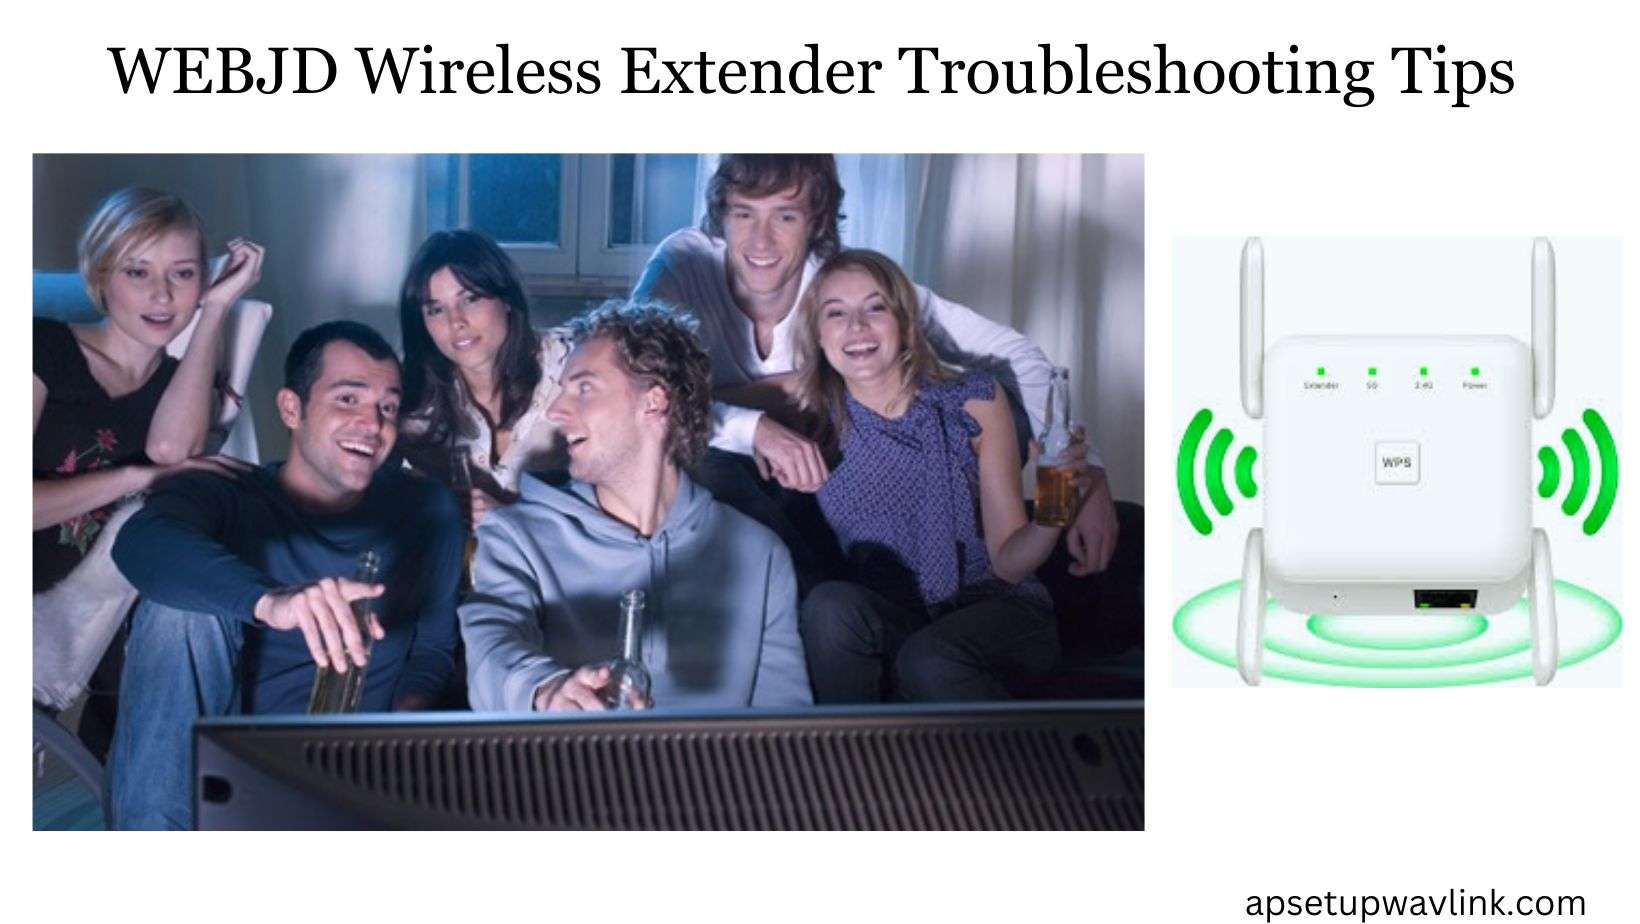 You are currently viewing WEBJD Wireless Extender Troubleshooting Tips